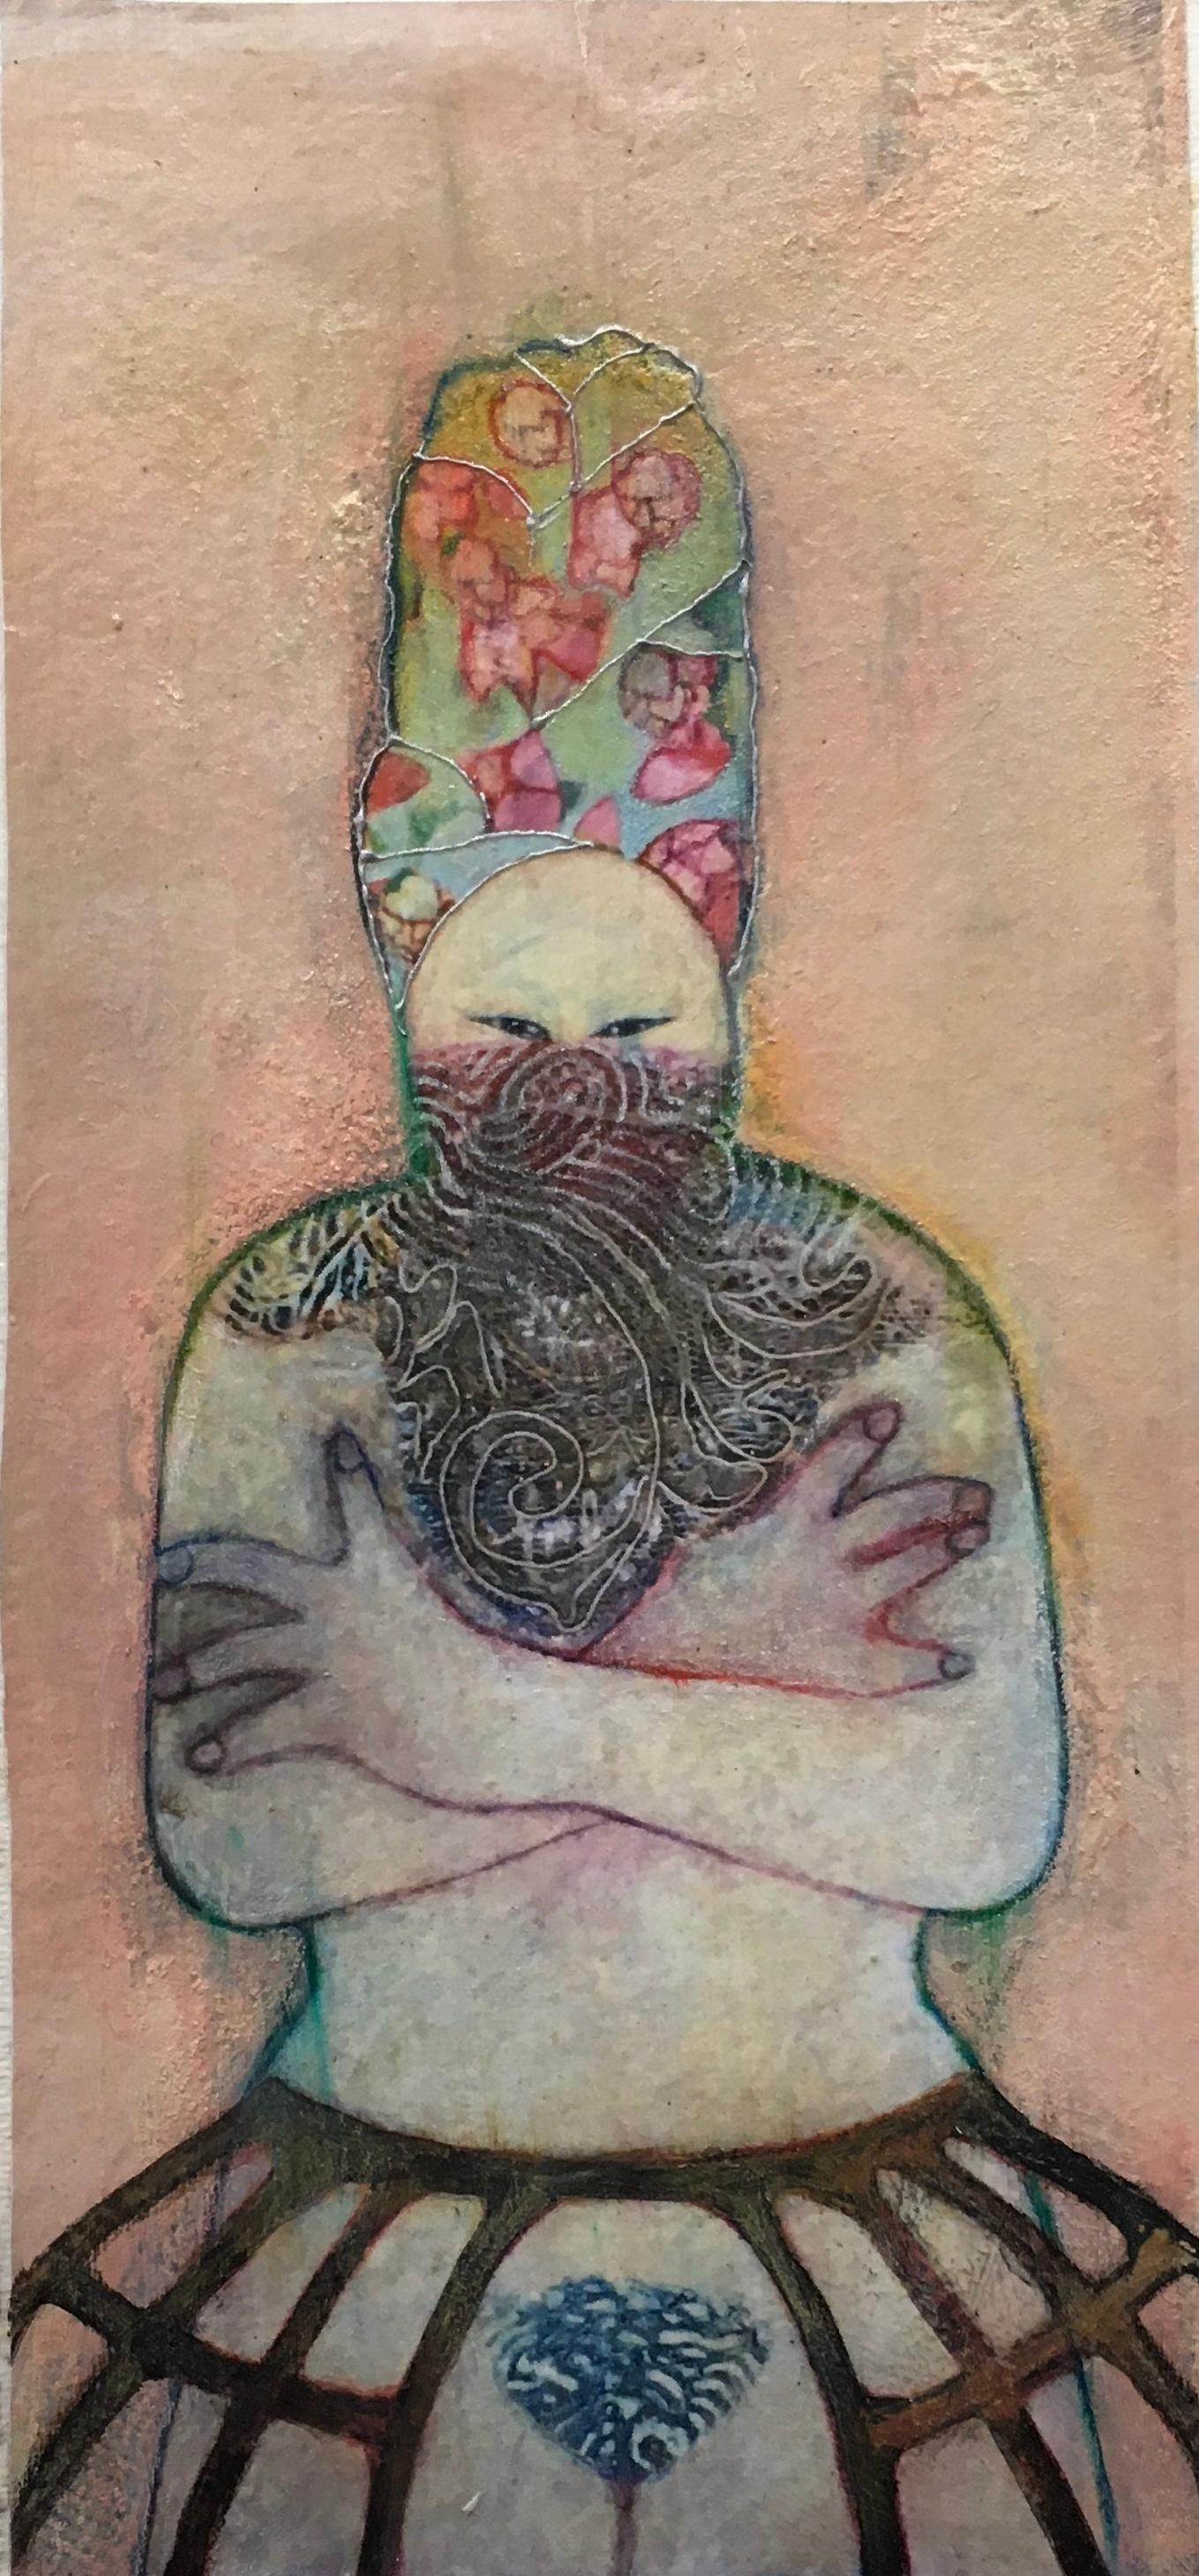 Turban, mixed media portrait of nude woman wearing floral headpiece